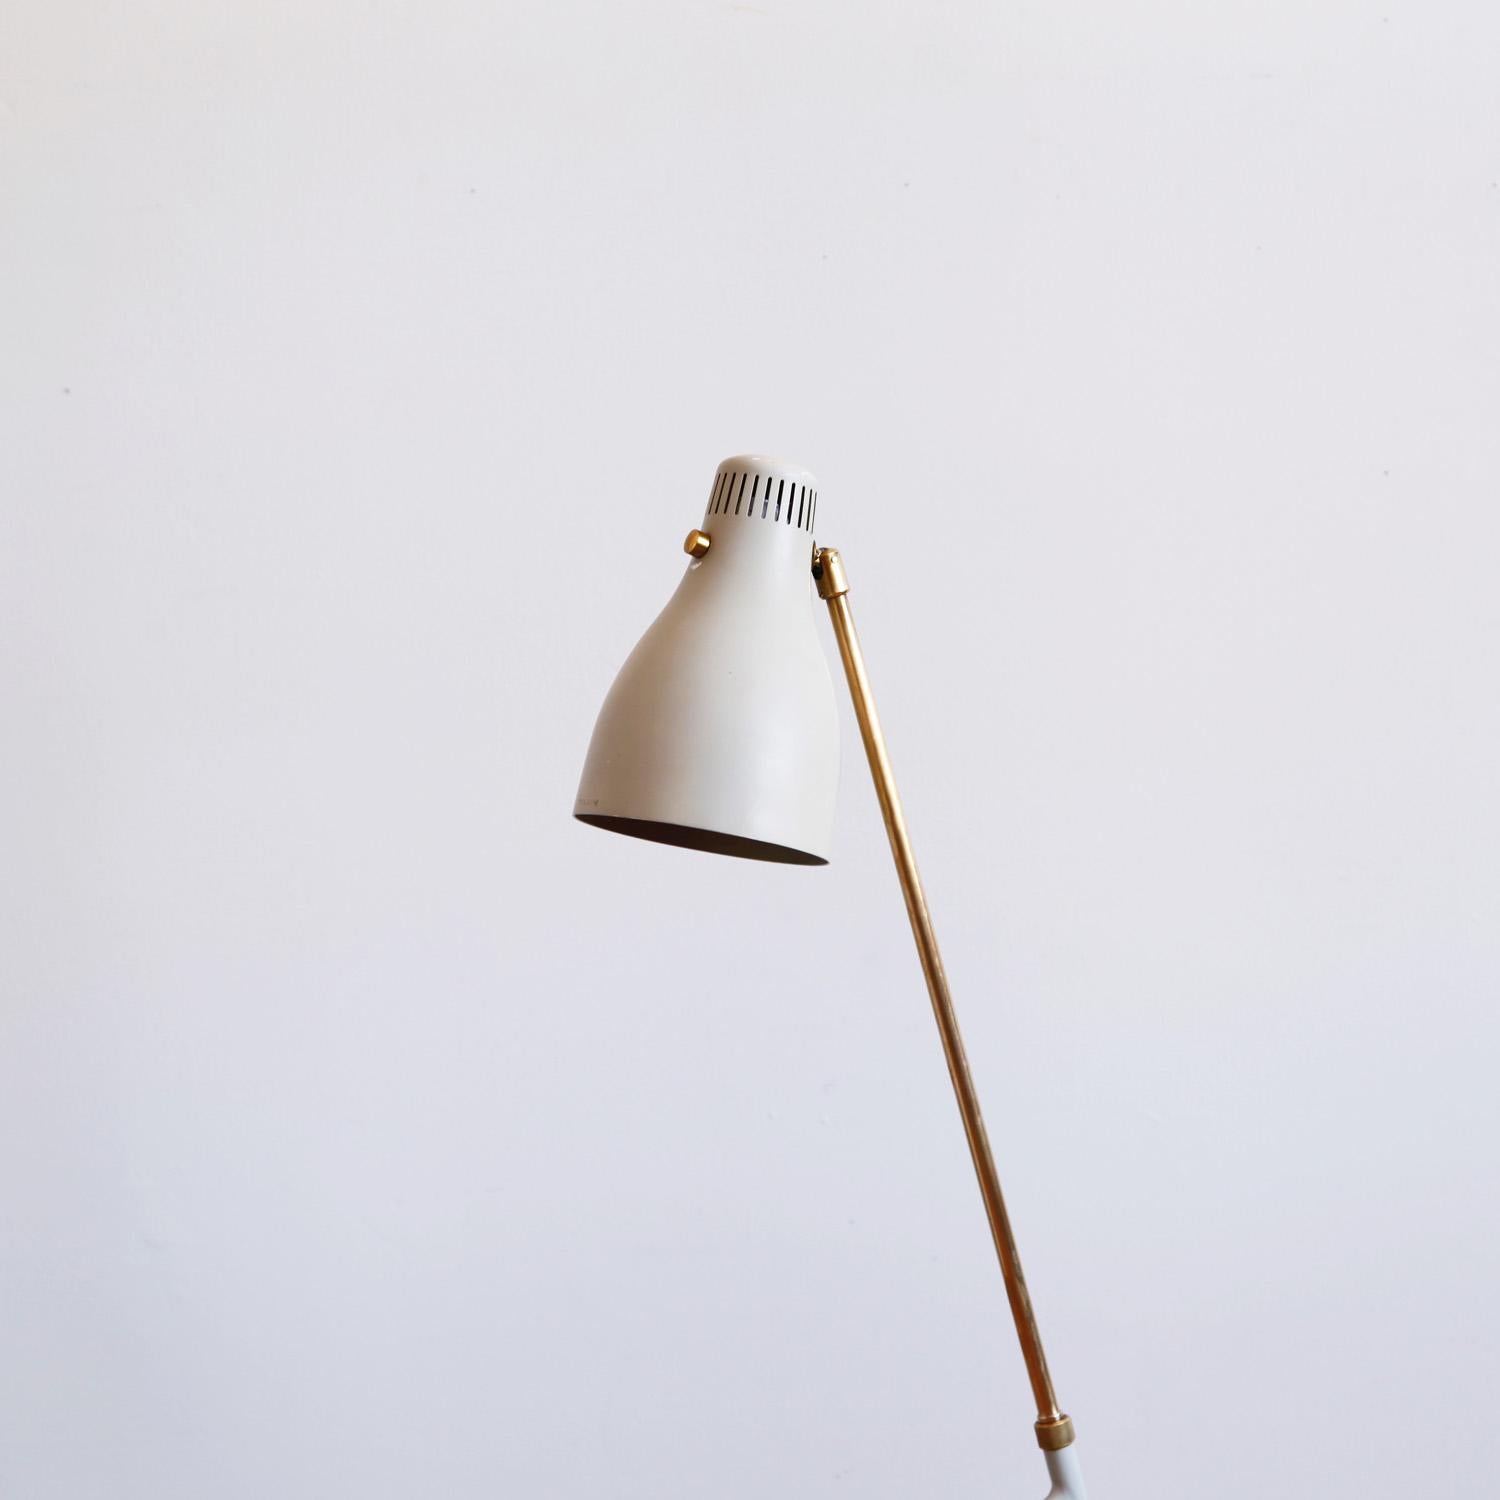 A rare model 541 floor lamp with enameled metal shade by Hans Bergström for the Swedish lighting manufacturer Ateljé Lyktan. Rewired with a white cloth cord. Adjustable (dimensions give maximum height; 7? is diameter of base).